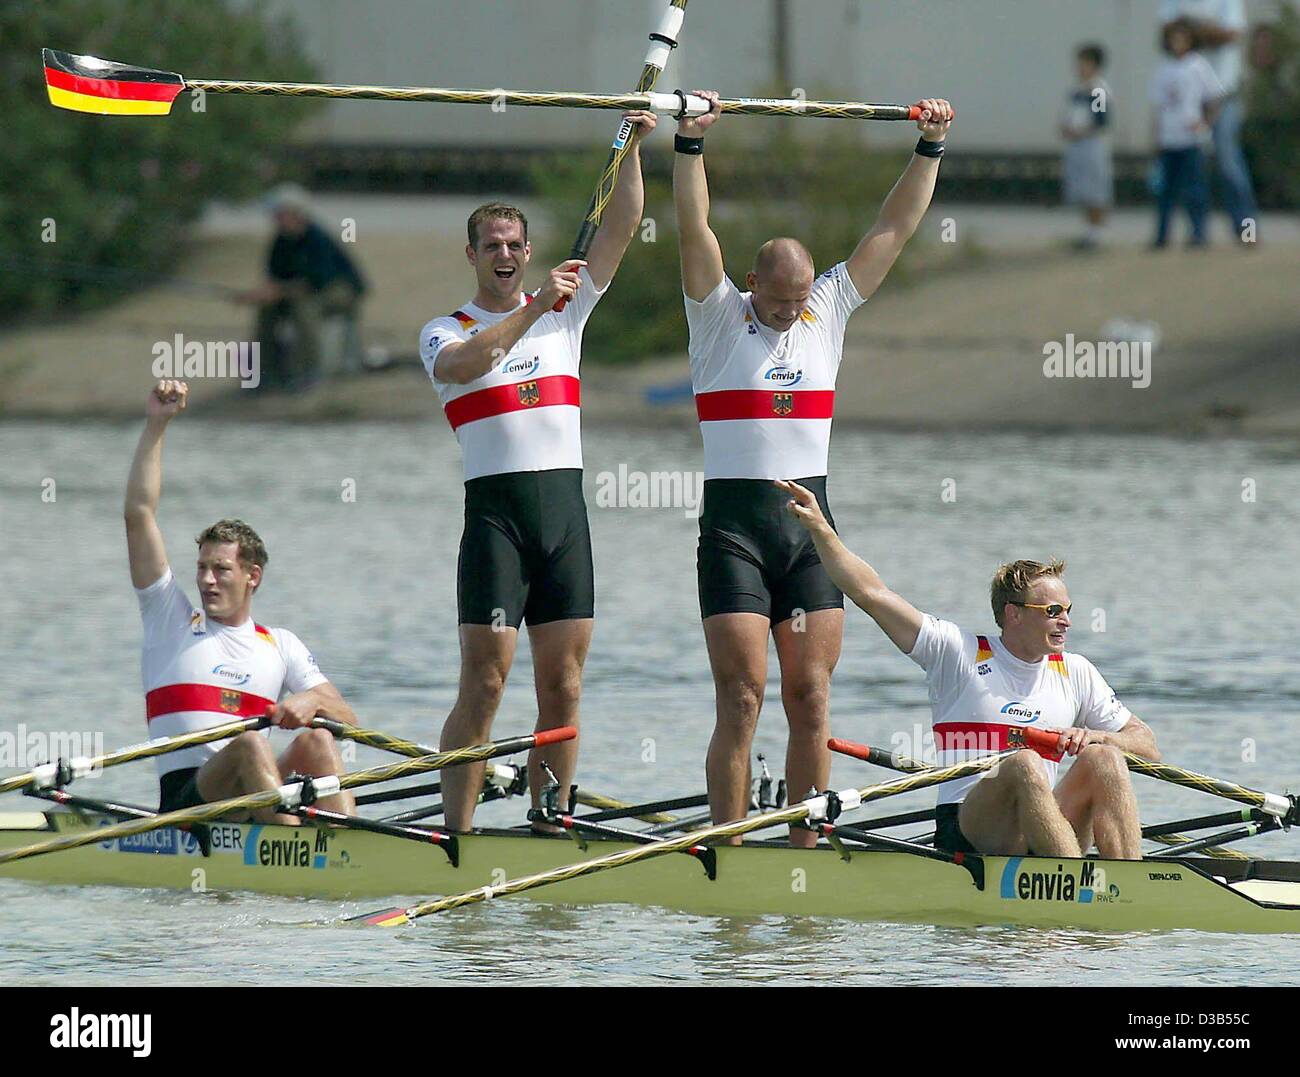 (dpa) - The German quadruple scull team cheers after winning gold in the Rowing World Championships in Seville, Spain, 22 September 2002. L-R: Rene Bertram, Stephan Volkert, Marco Geisler and Robert Sens. Stock Photo